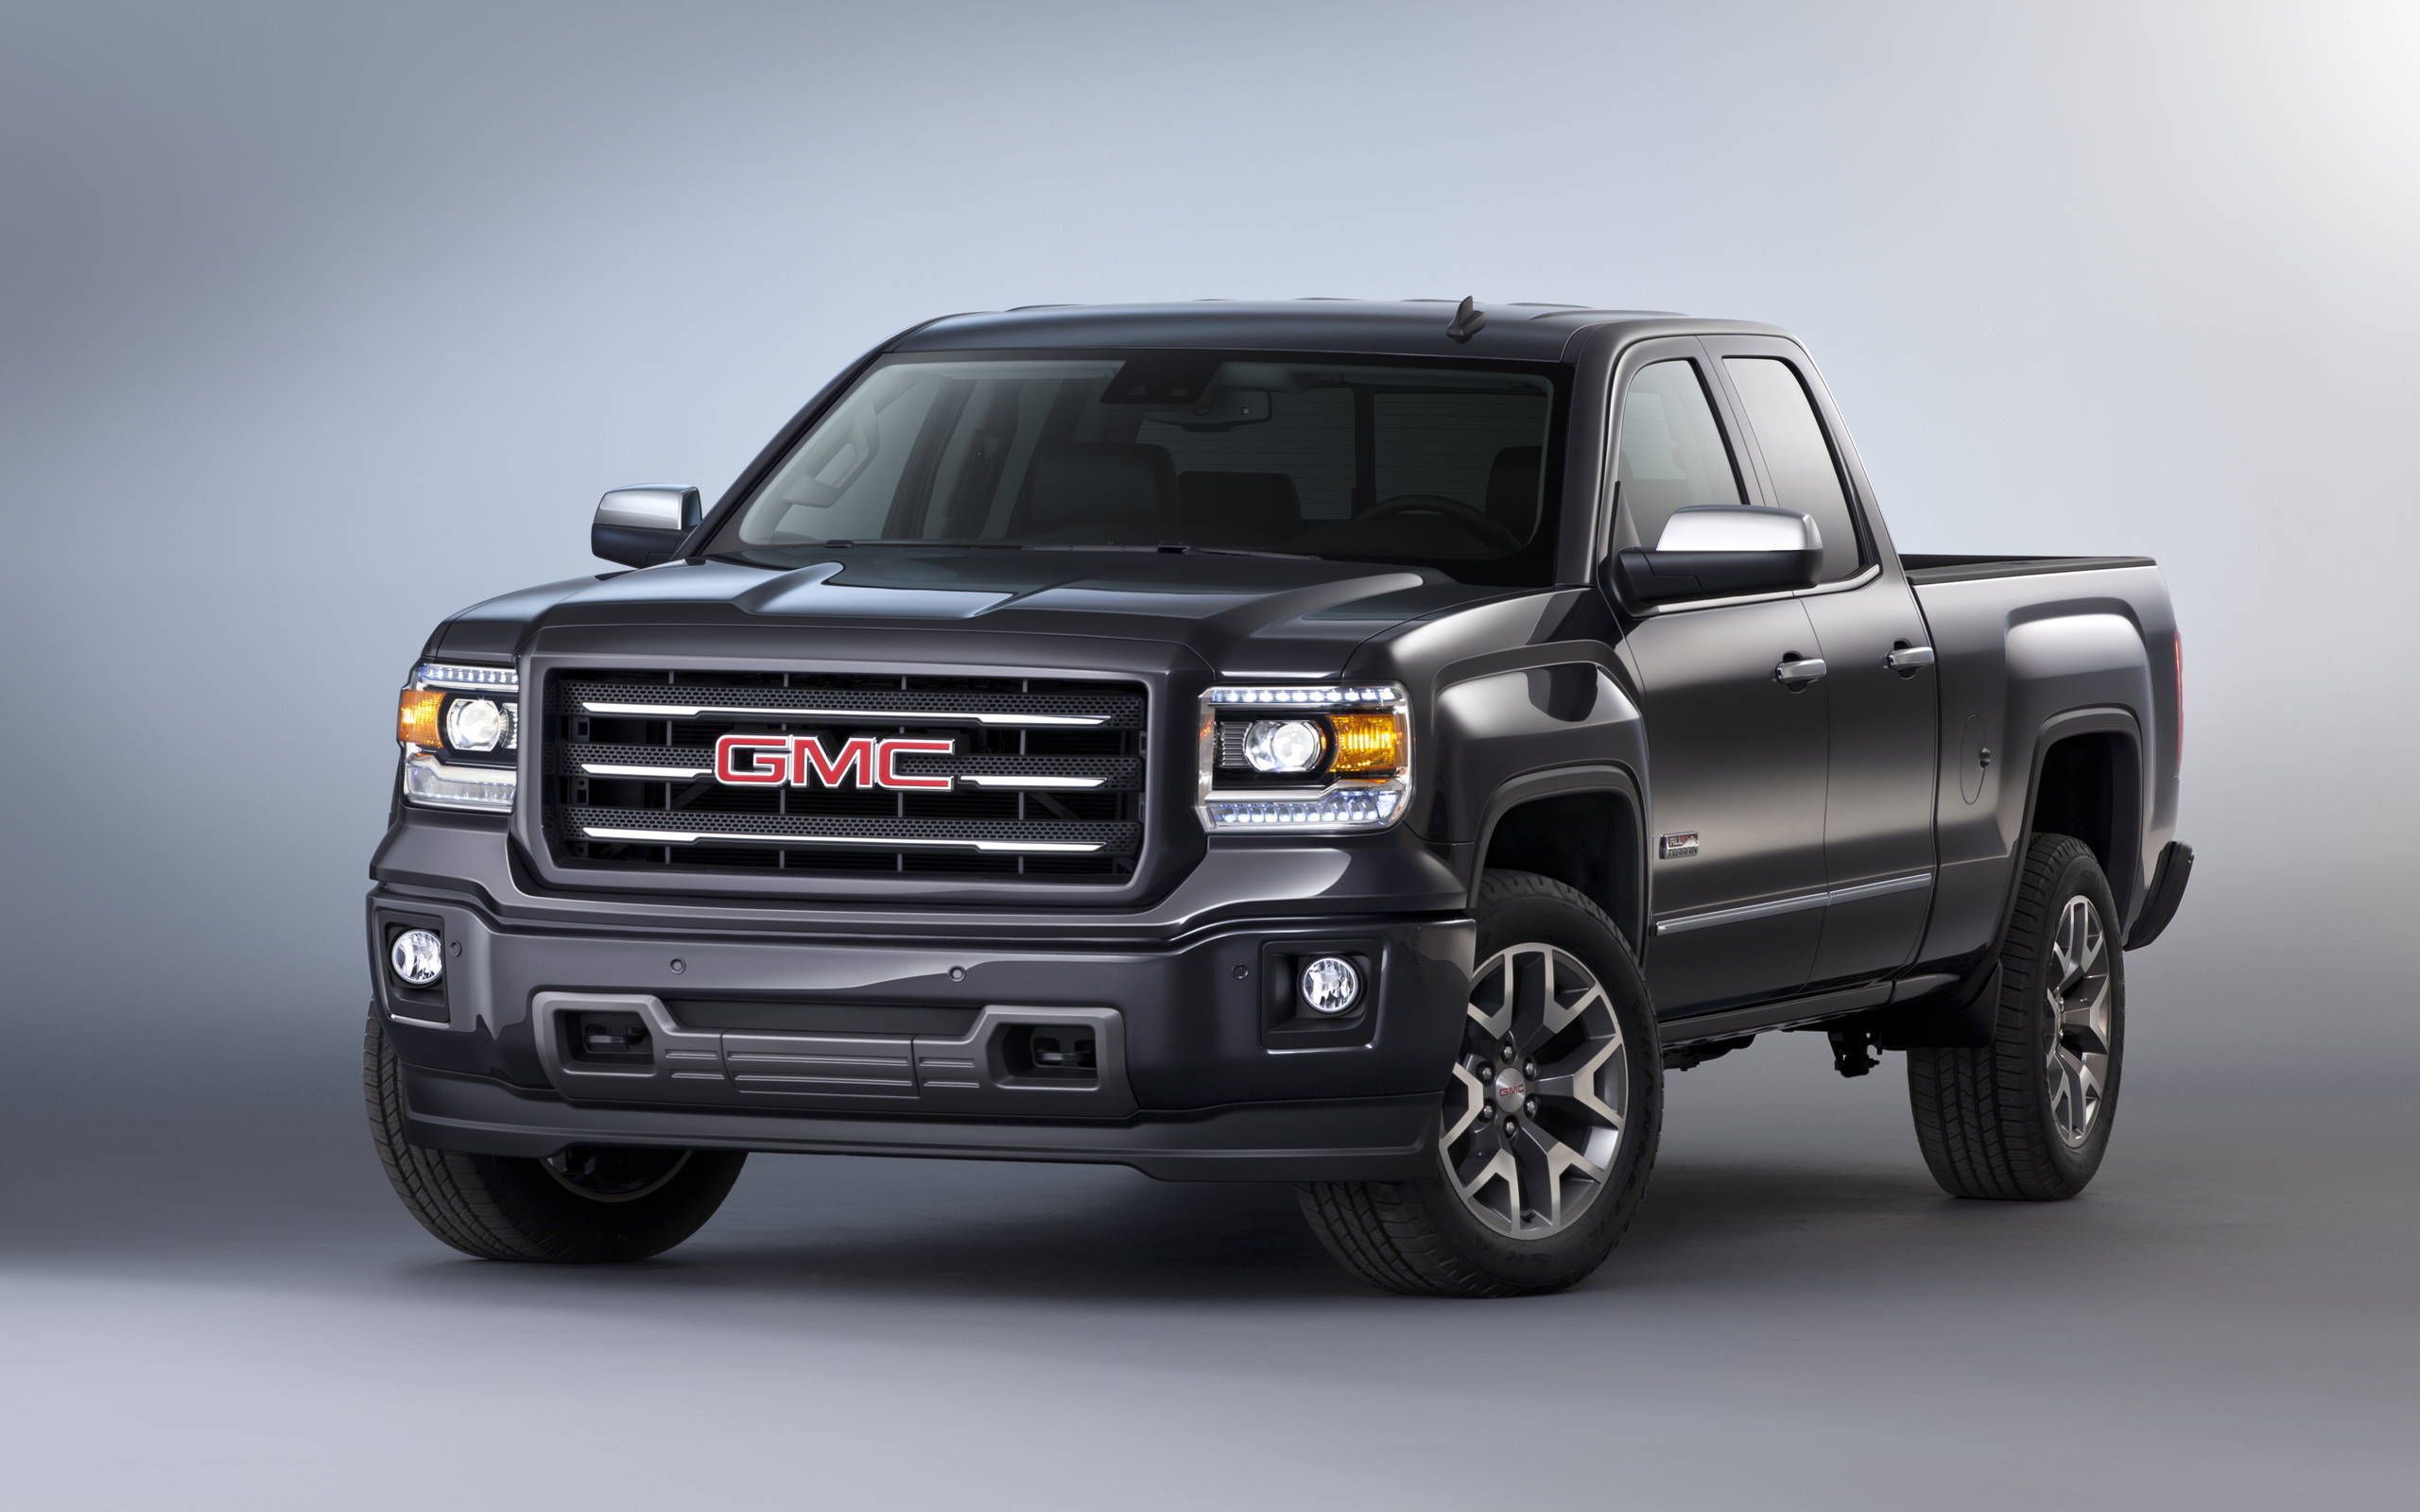 2015 GMC Sierra 1500 review notes: Needs a few more features